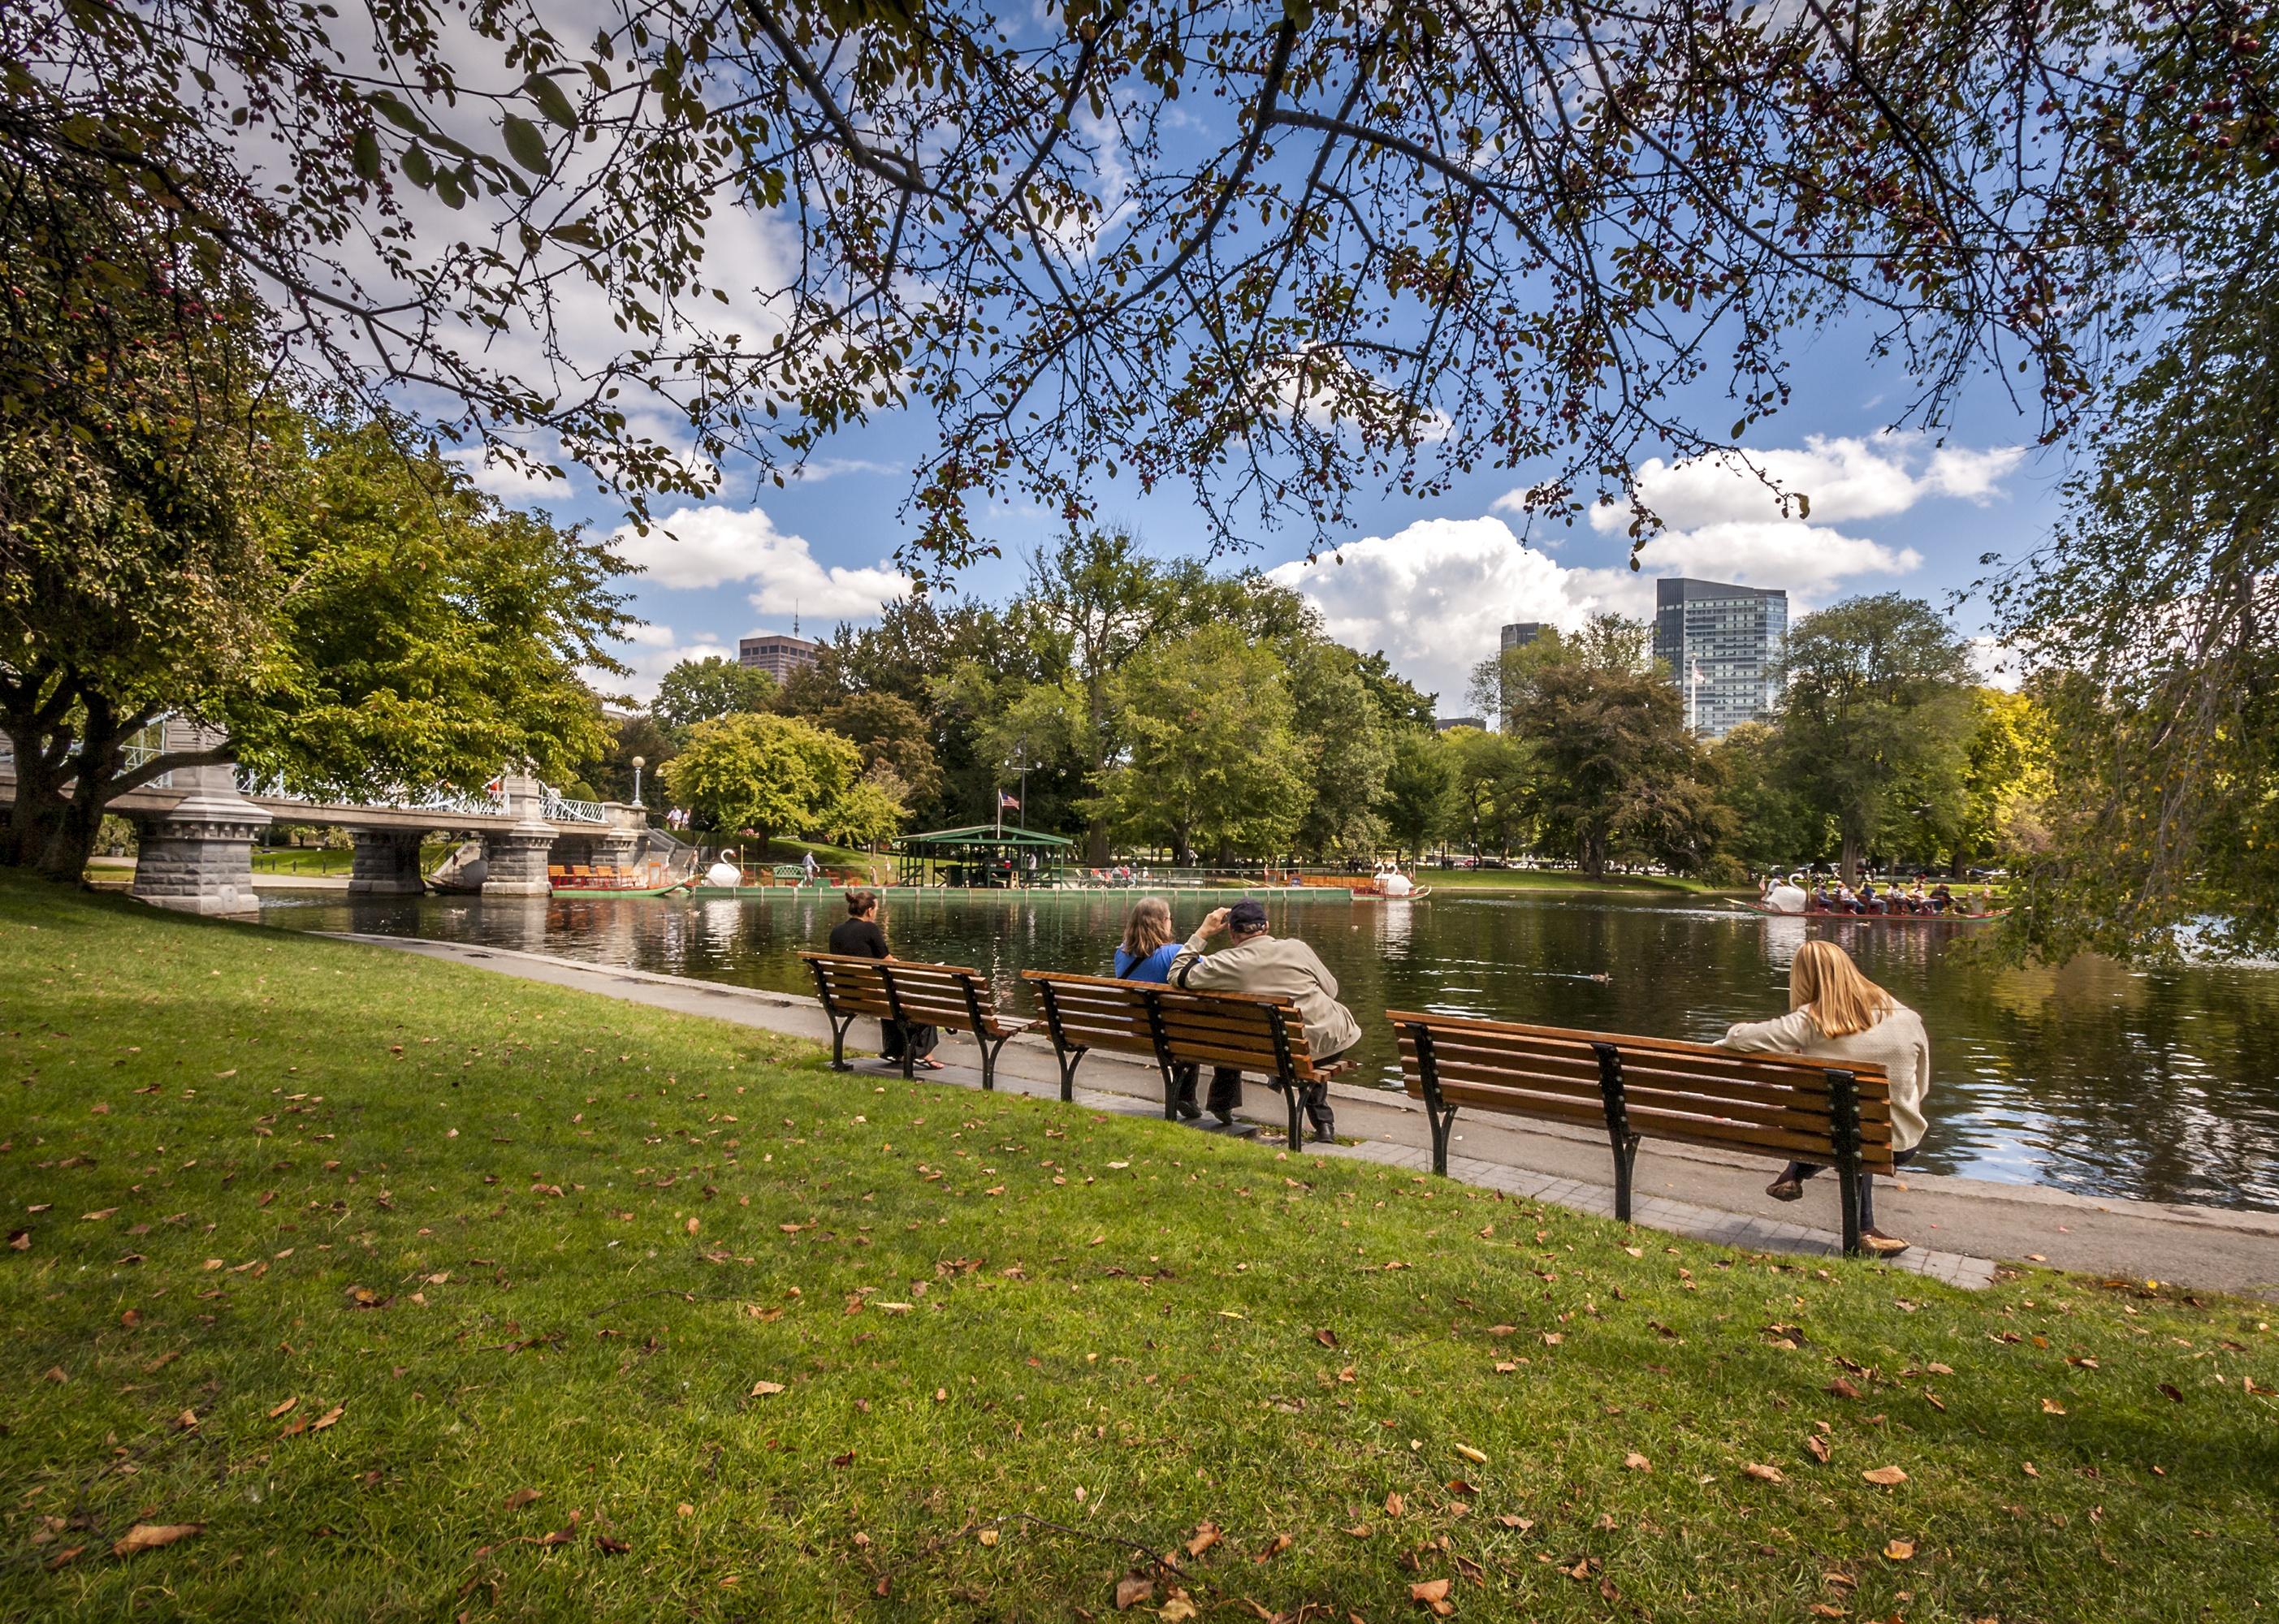 People on benches visiting the Boston Public Garden.